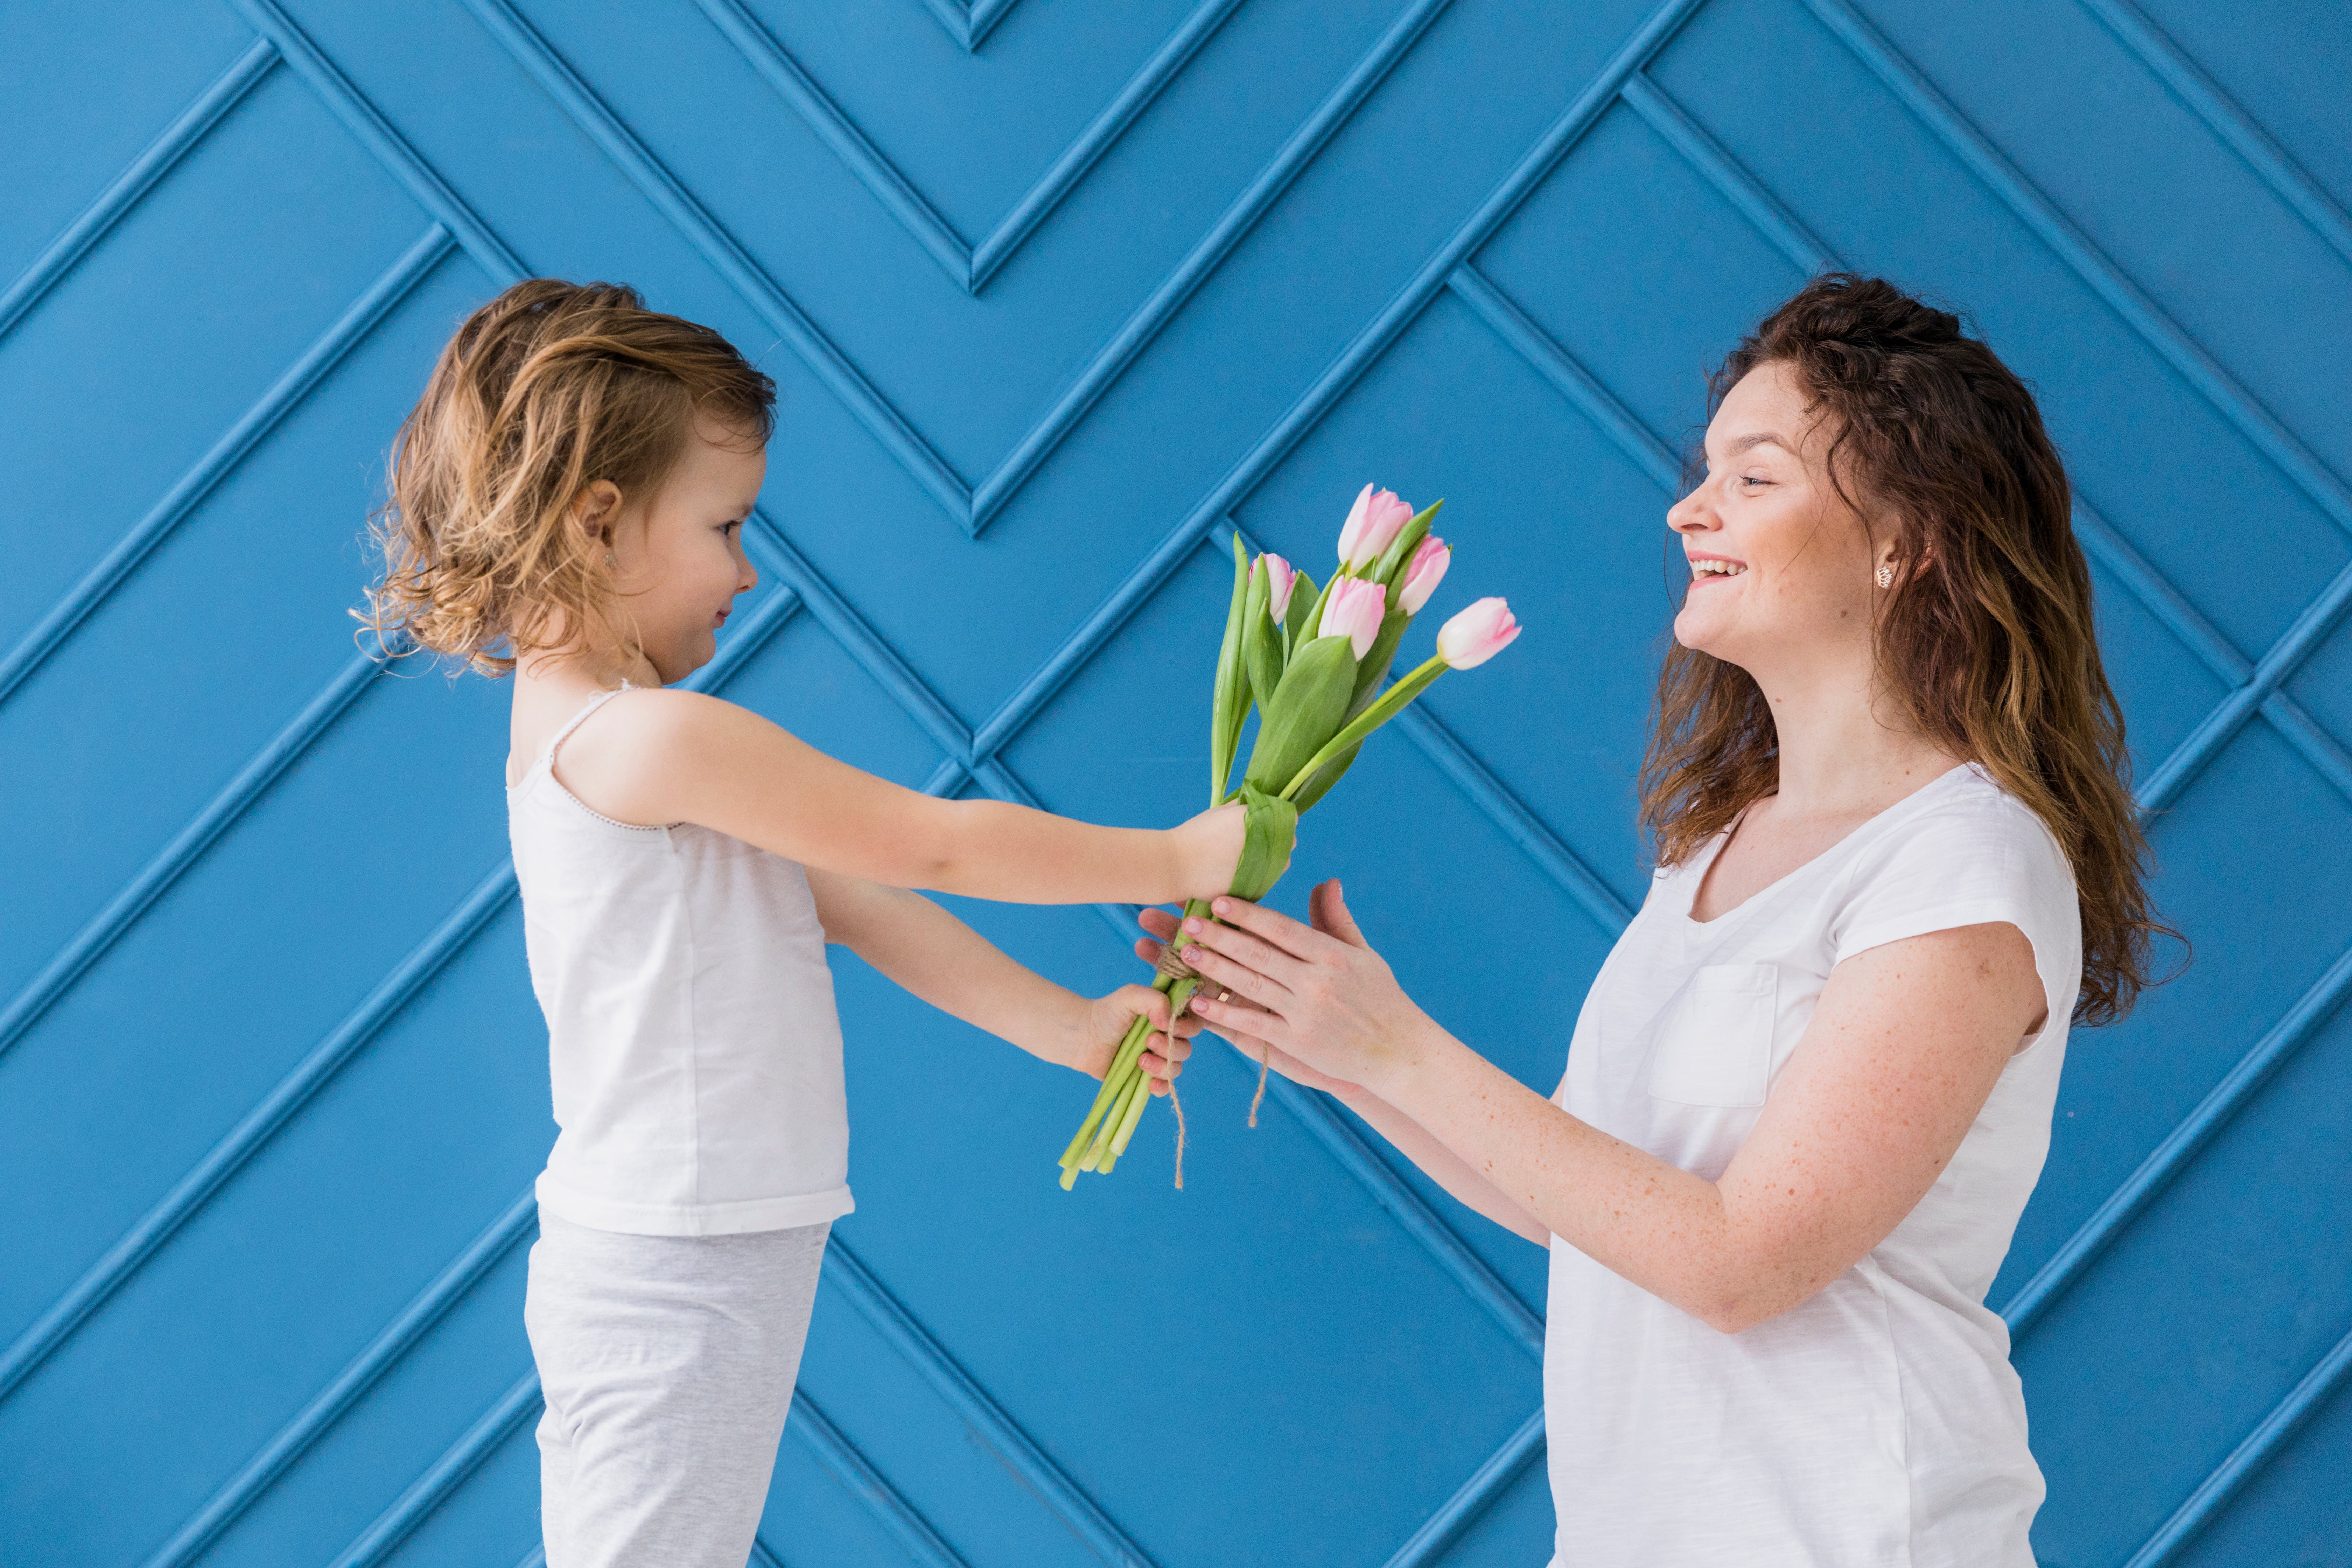 The Perfect Gift for Mom: Original Mother's Day Ideas